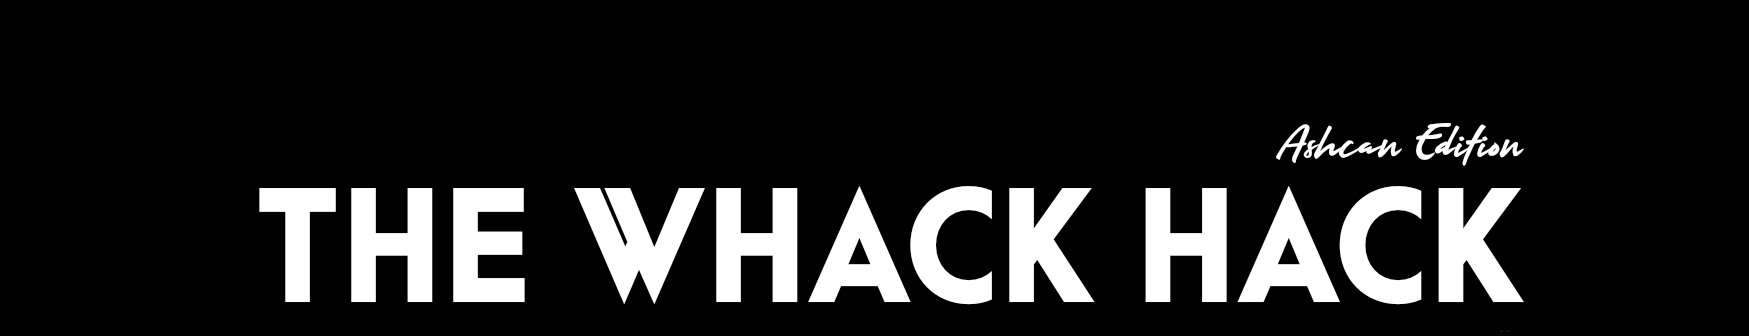 The Whack Hack